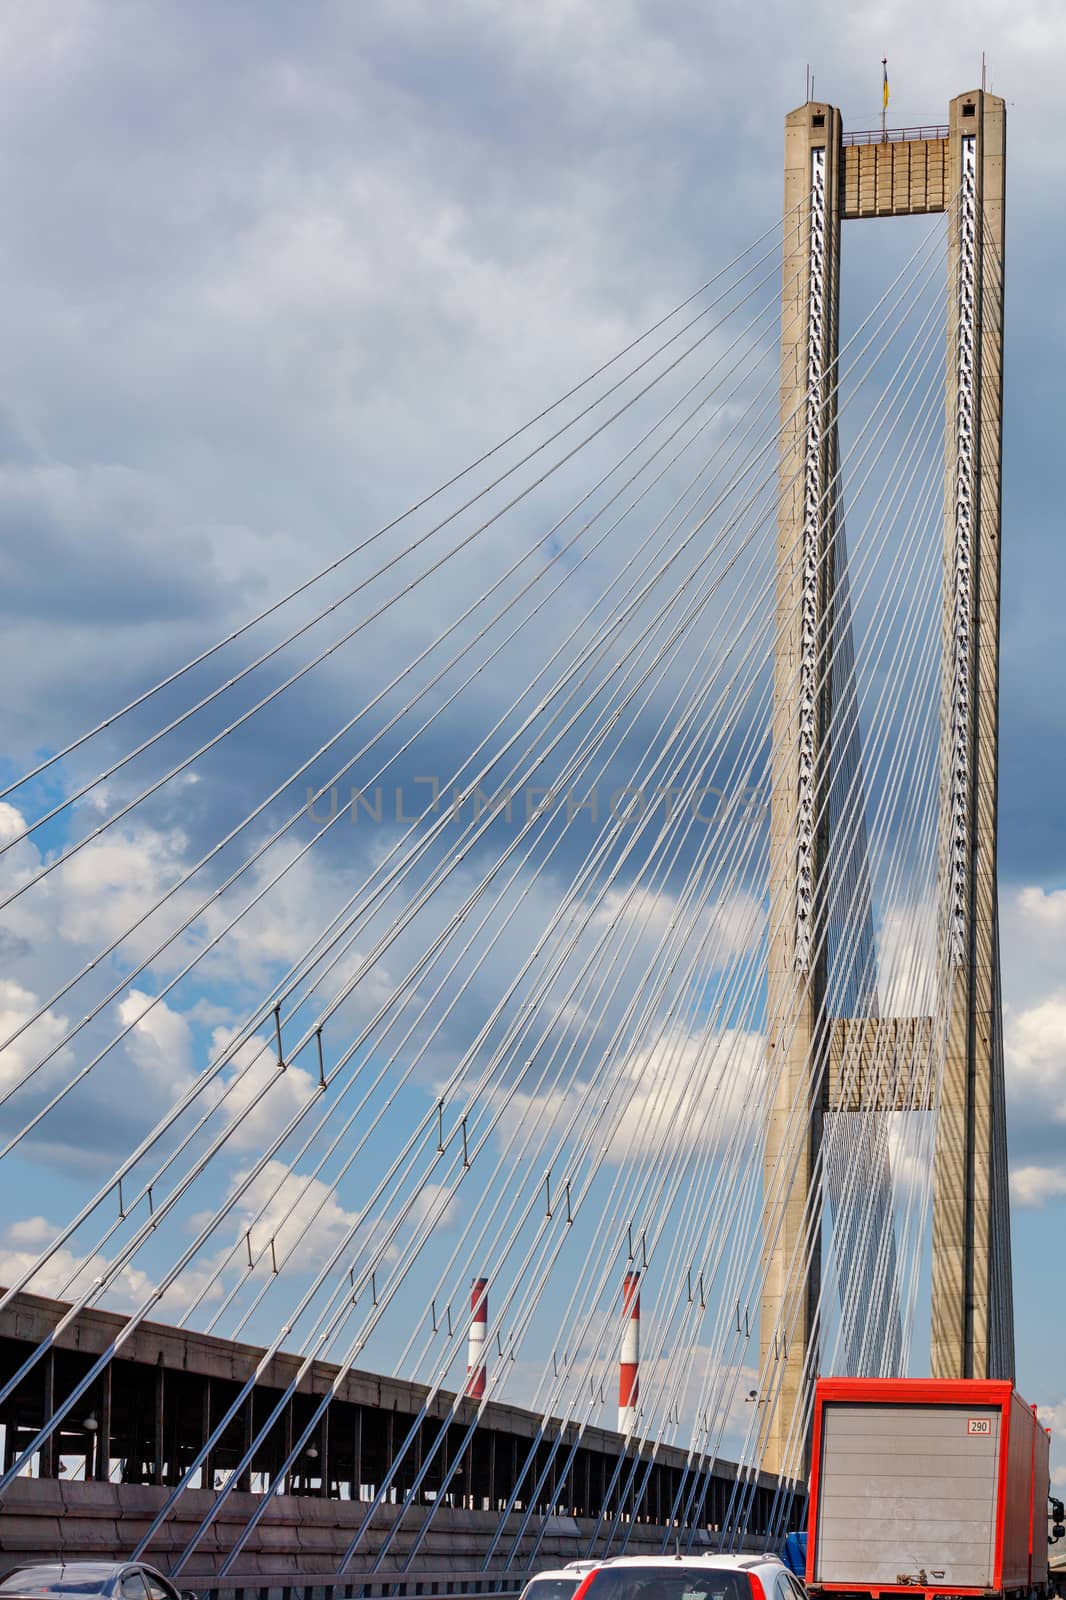 Cable-stayed South Bridge in Kyiv against the background of a stormy cloudy sky, traffic on the bridge, Ukraine.